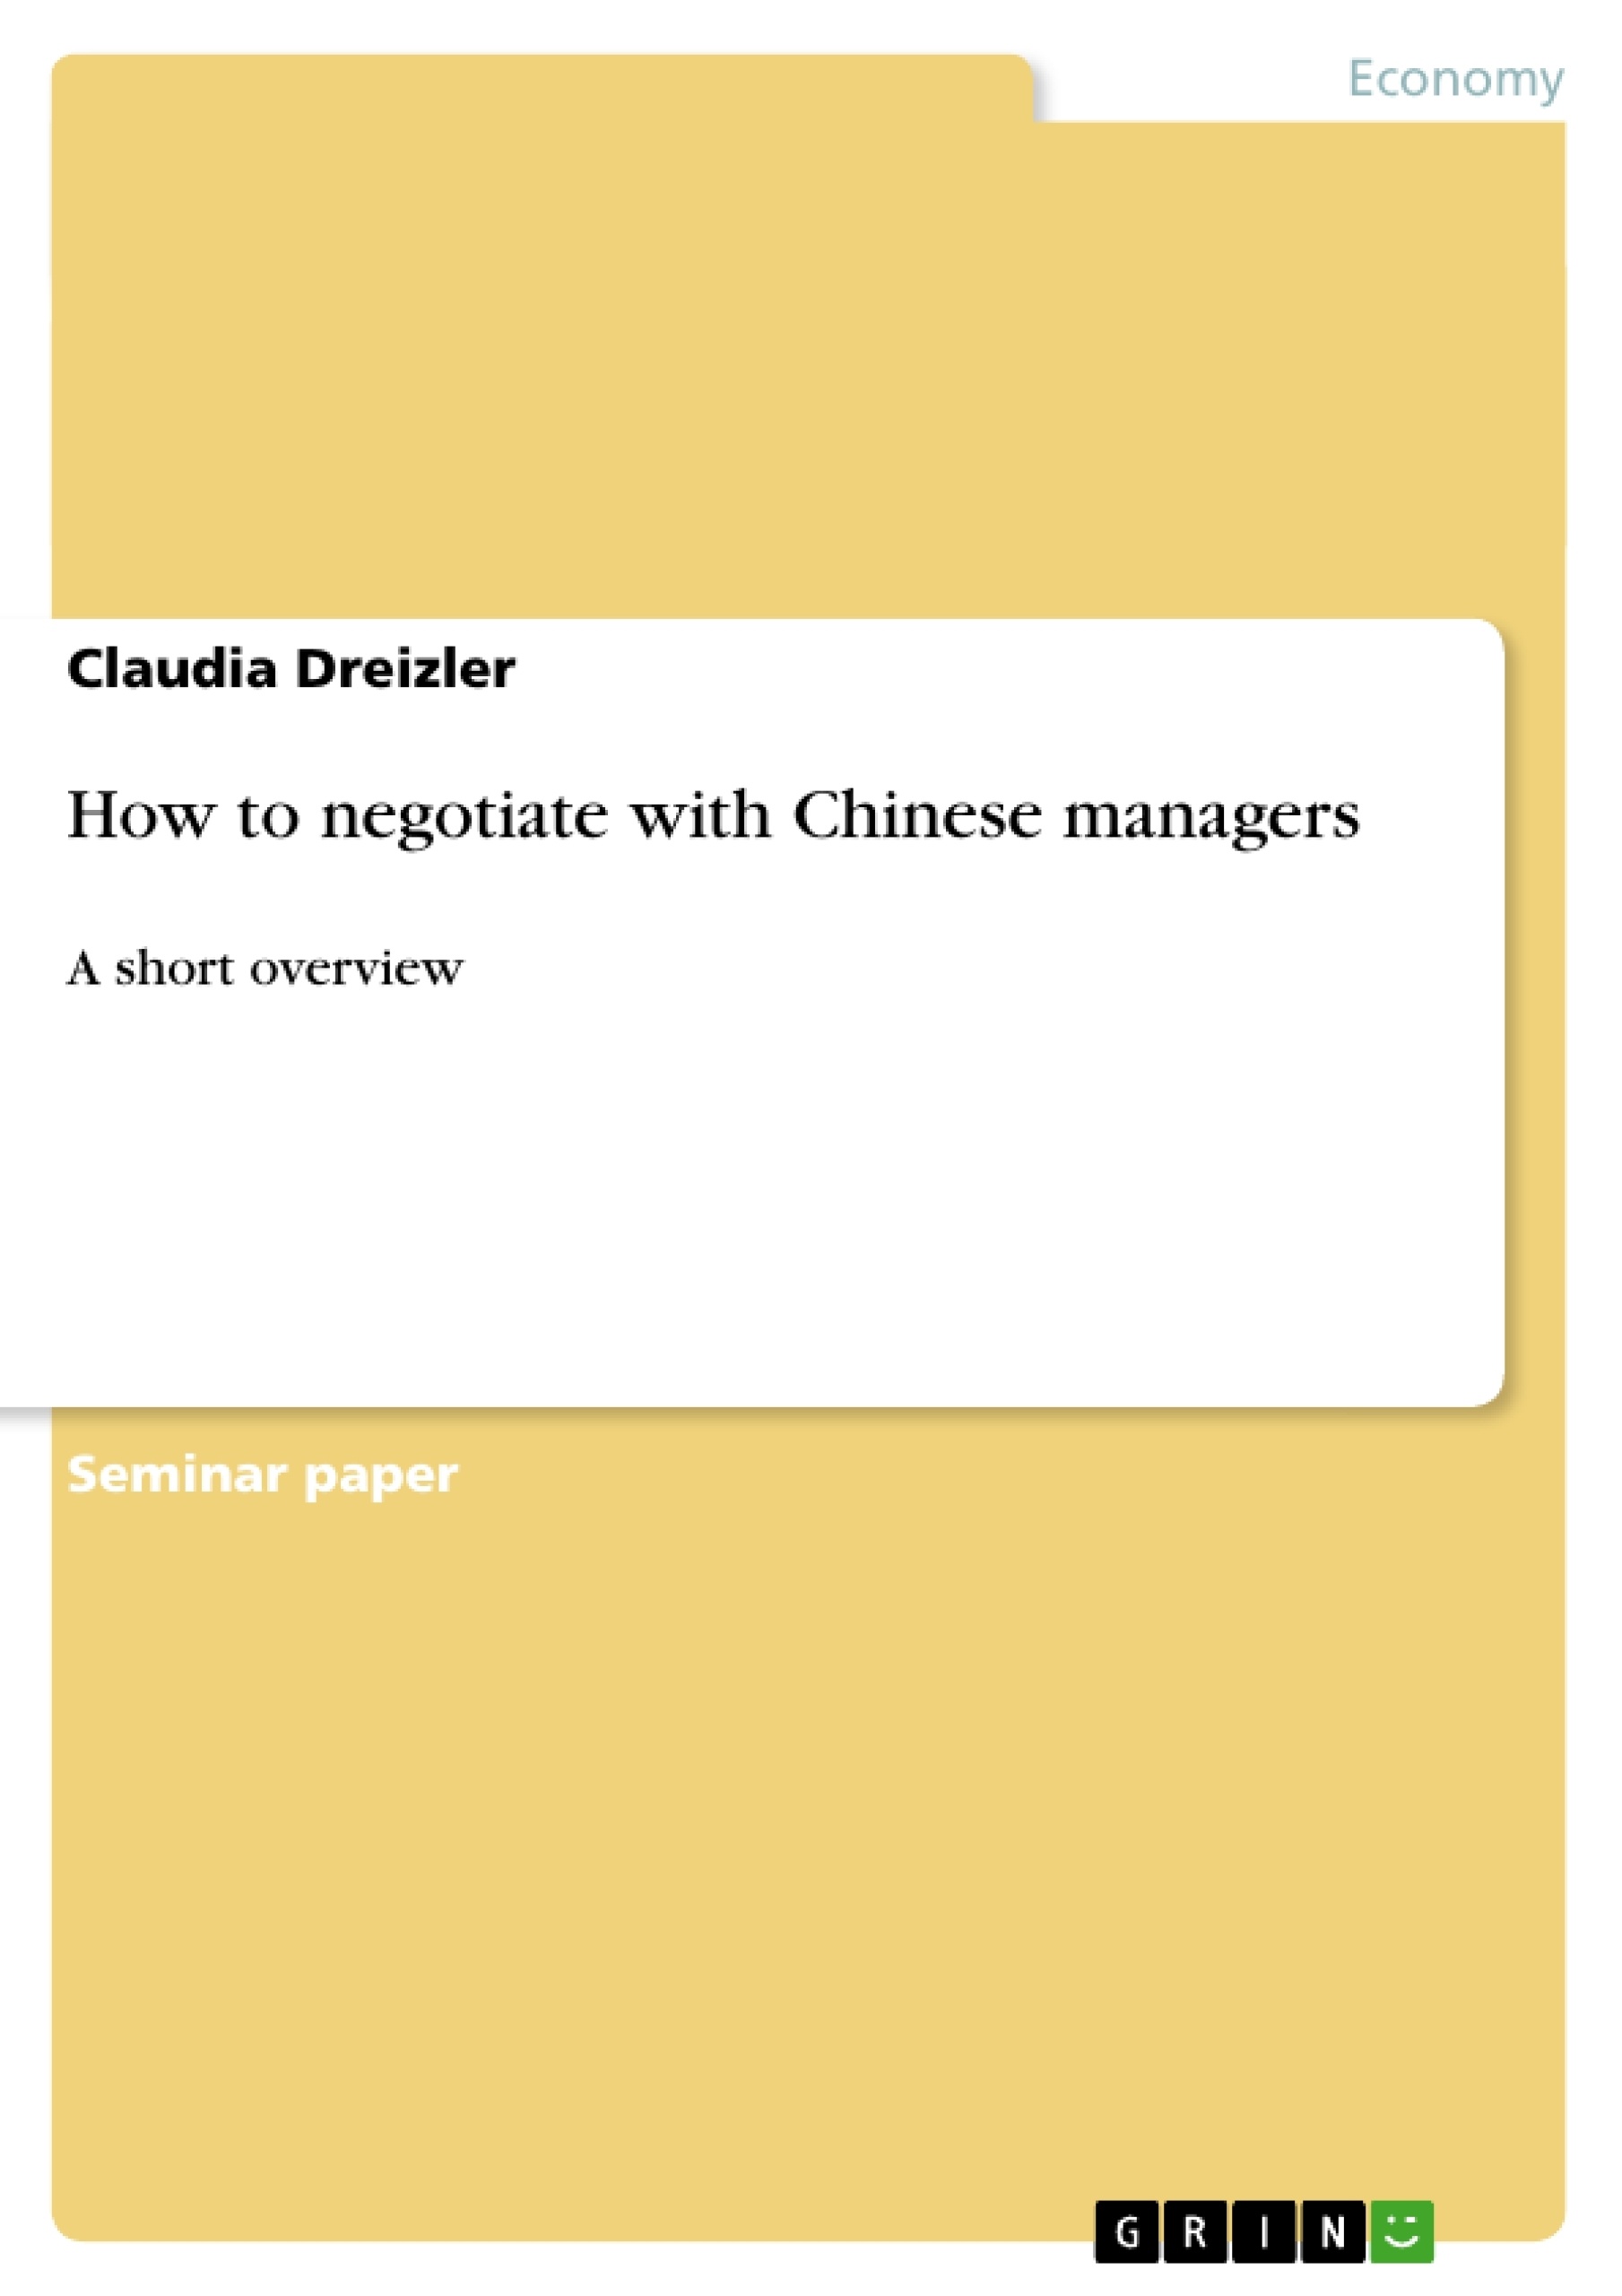 Title: How to negotiate with Chinese managers